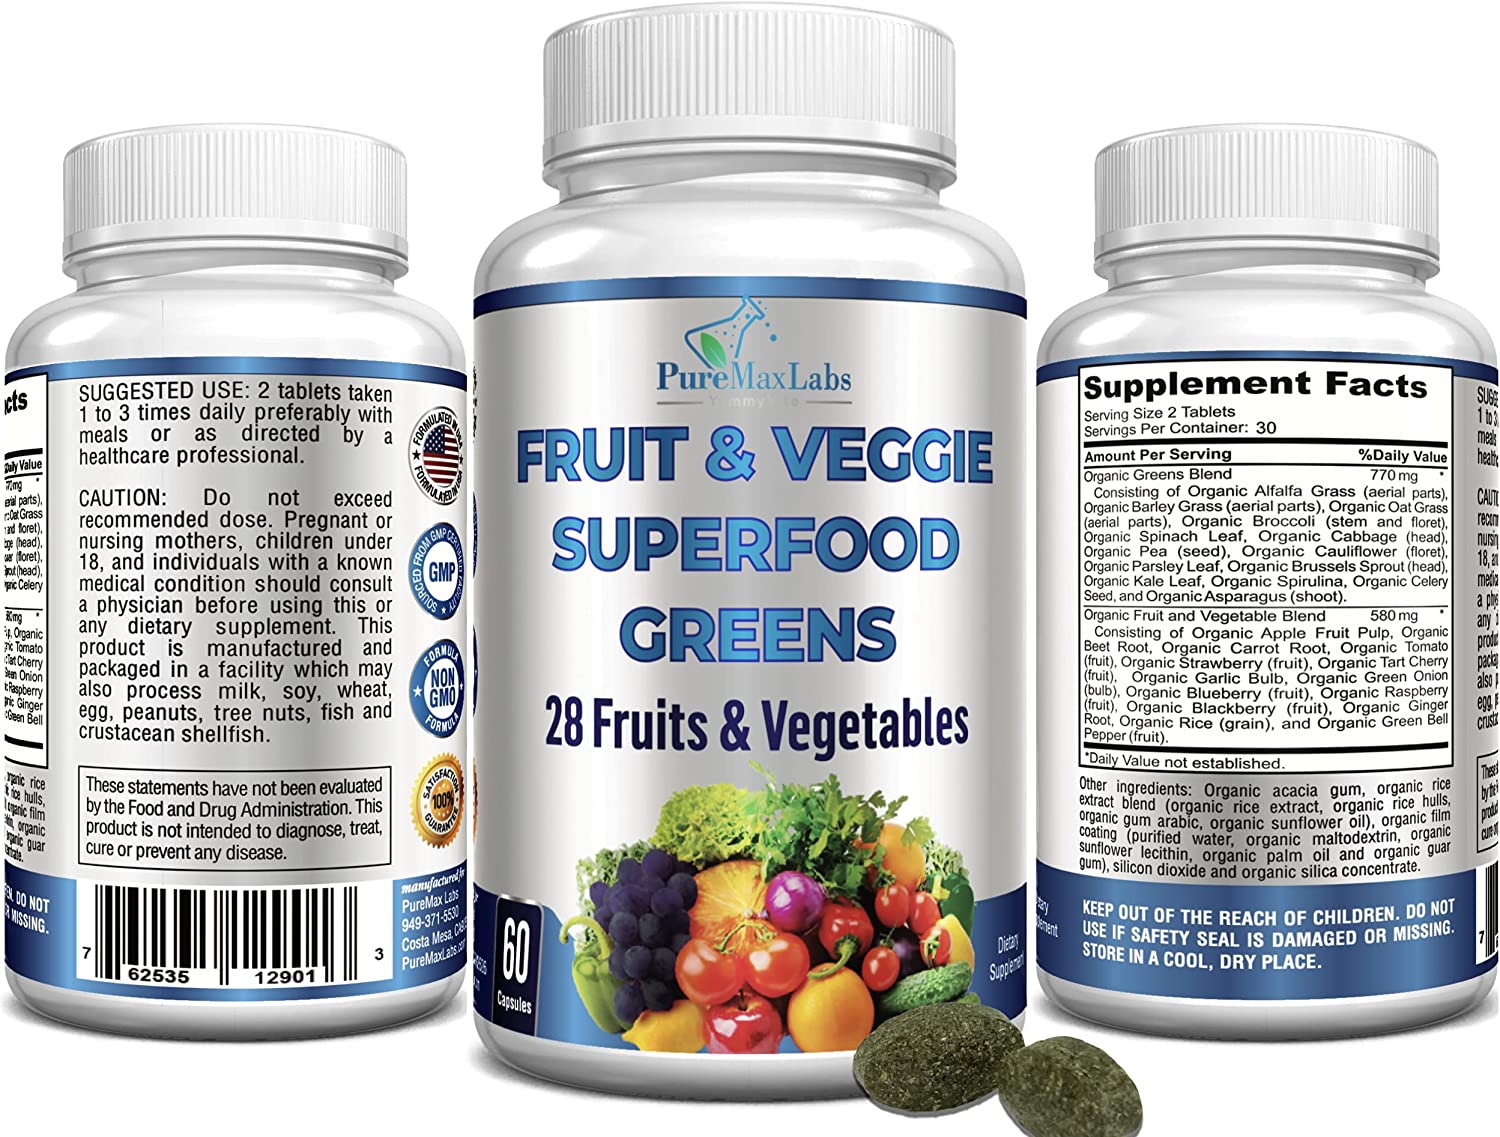 Fruit and Veggie Superfood Greens, 28 Fruits and Vegetables - 60 & 120 Tablets